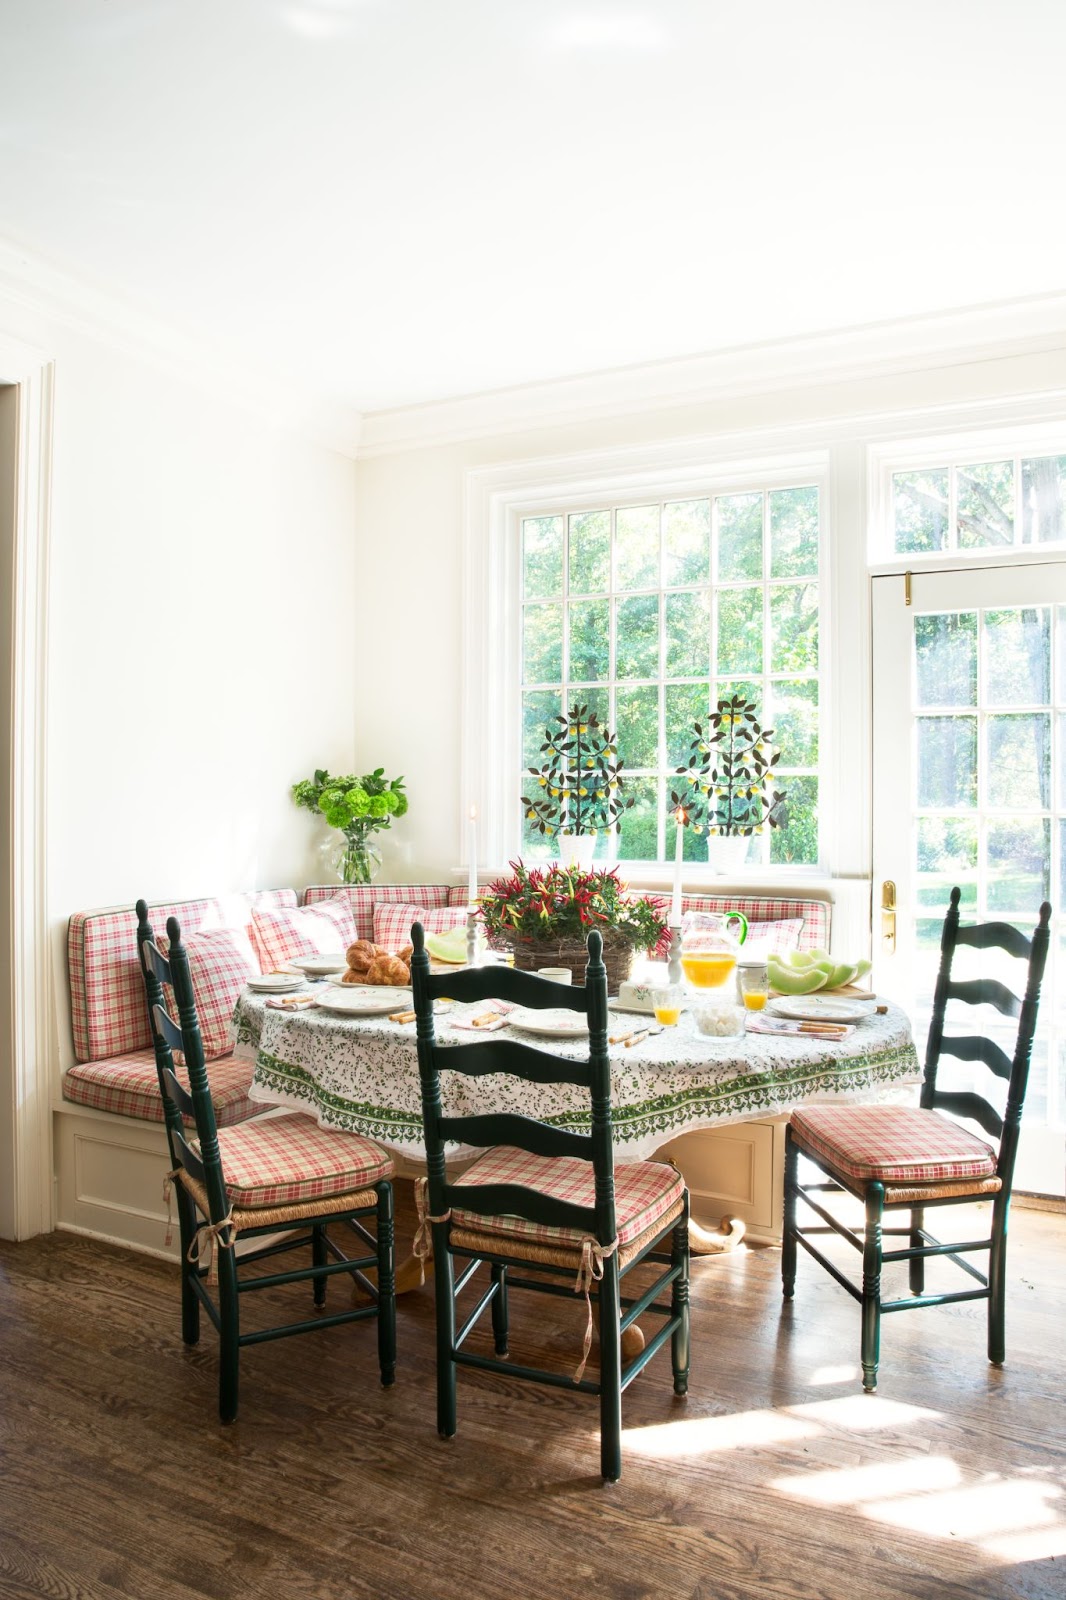 A breakfast nook decorated with vintage chairs.